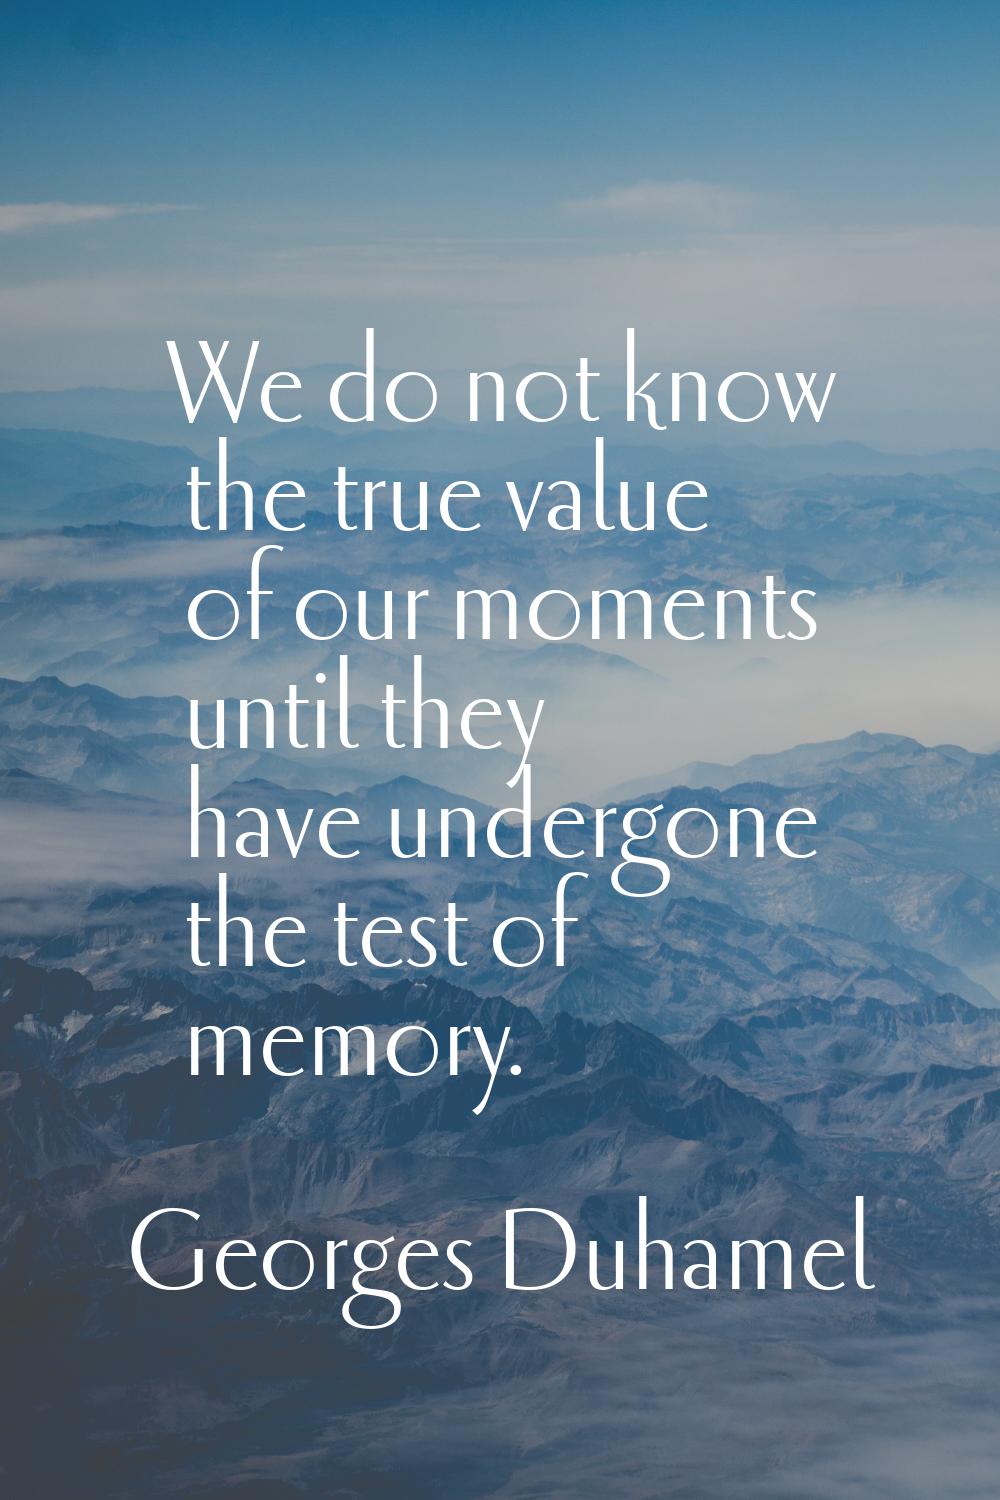 We do not know the true value of our moments until they have undergone the test of memory.